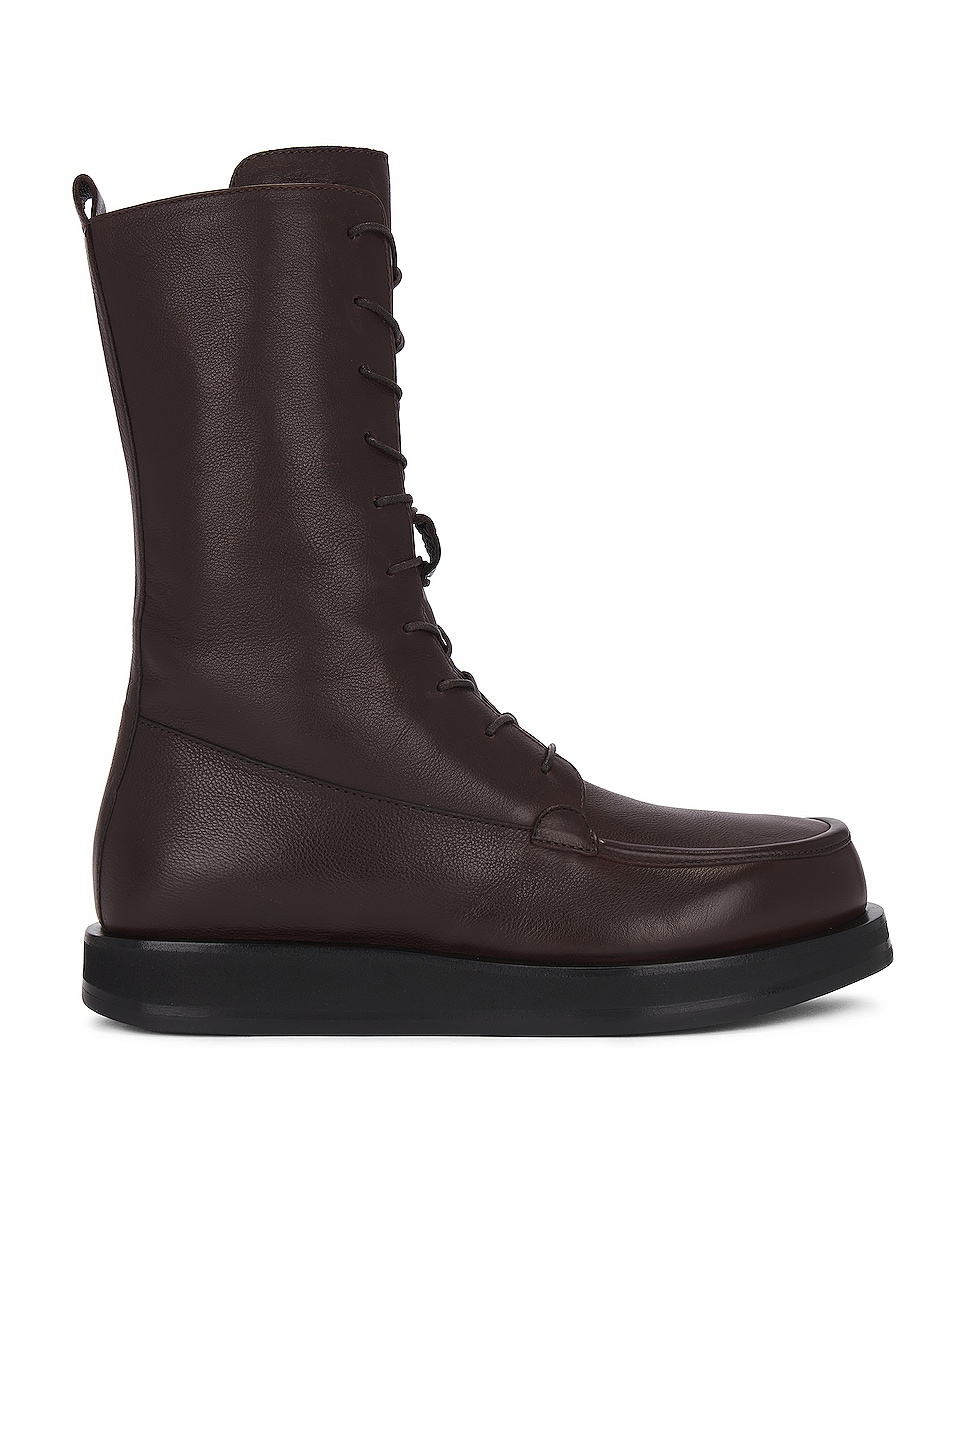 Image 1 of The Row Patty Boot in Dark Brown